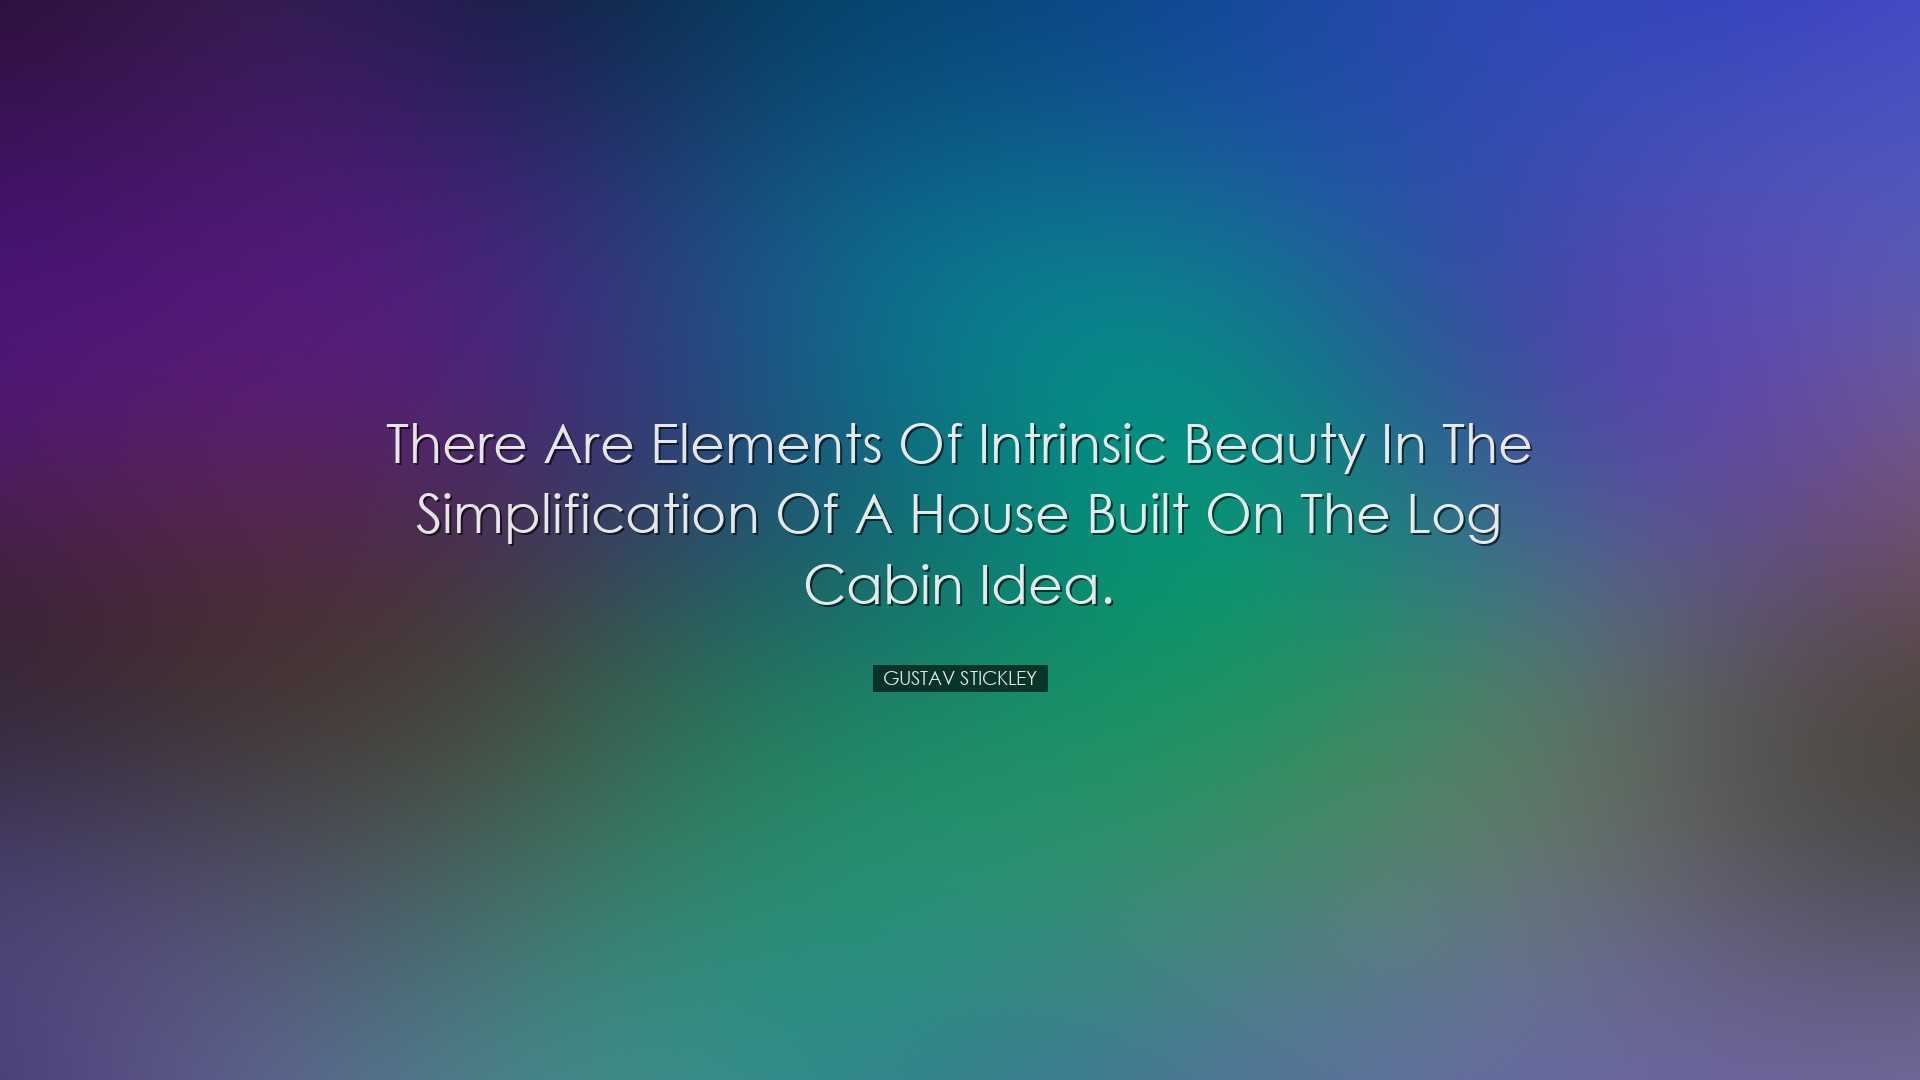 There are elements of intrinsic beauty in the simplification of a